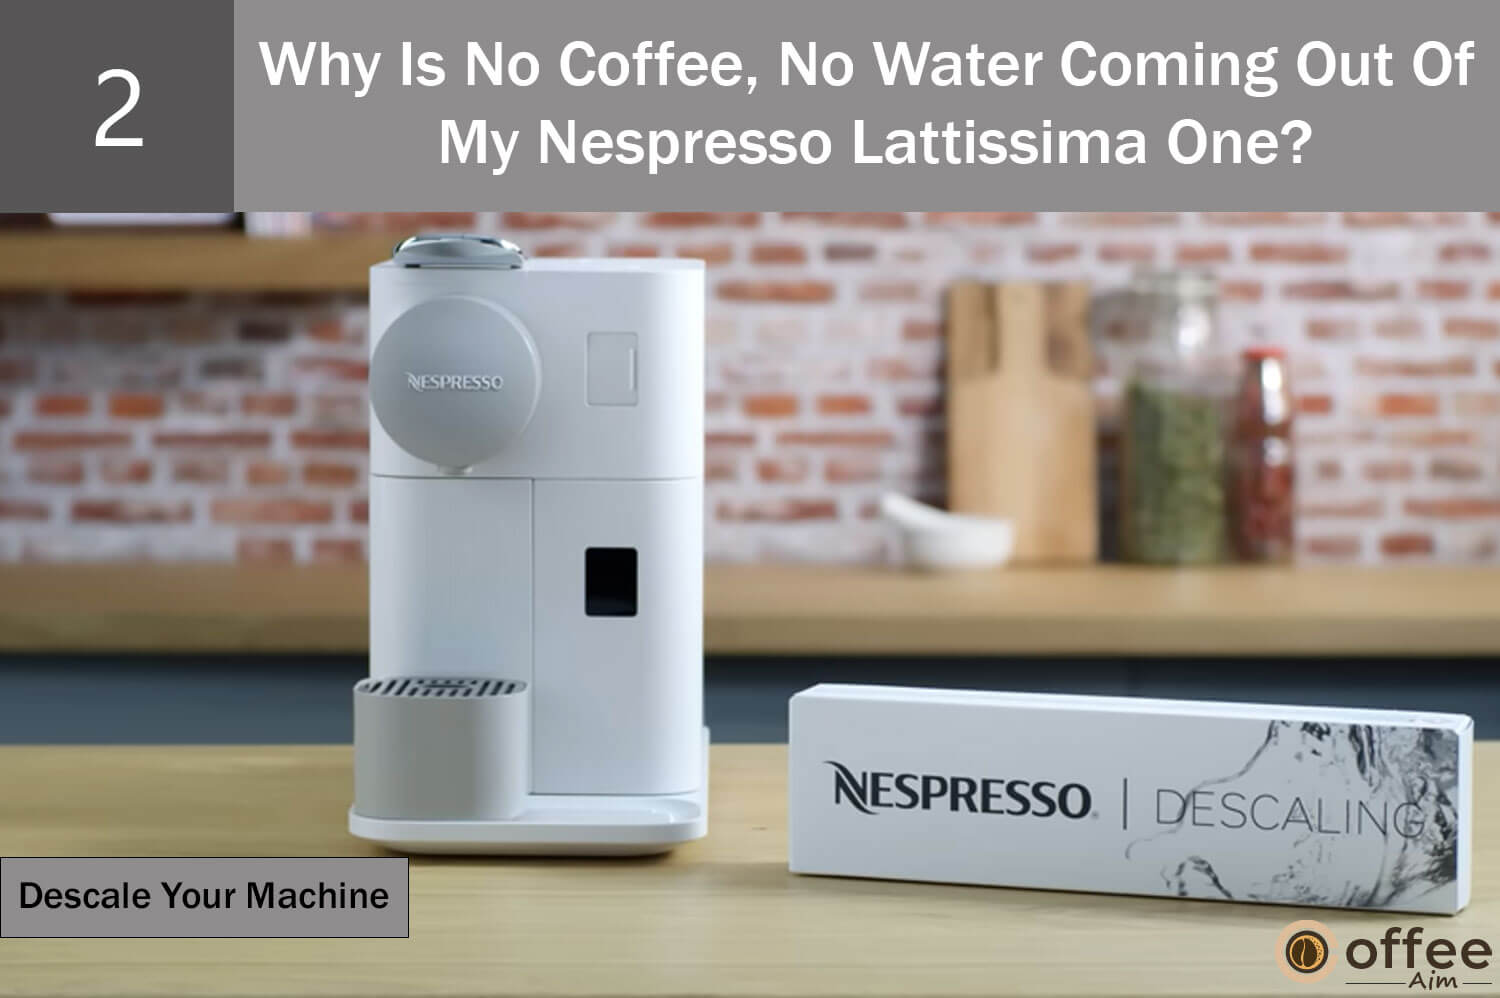 Remove limescale effectively from your Nespresso Lattissima One by using the machine's descaling solution. Keep your machine free from limescale for optimum performance. Find the descaling procedure in the section provided.